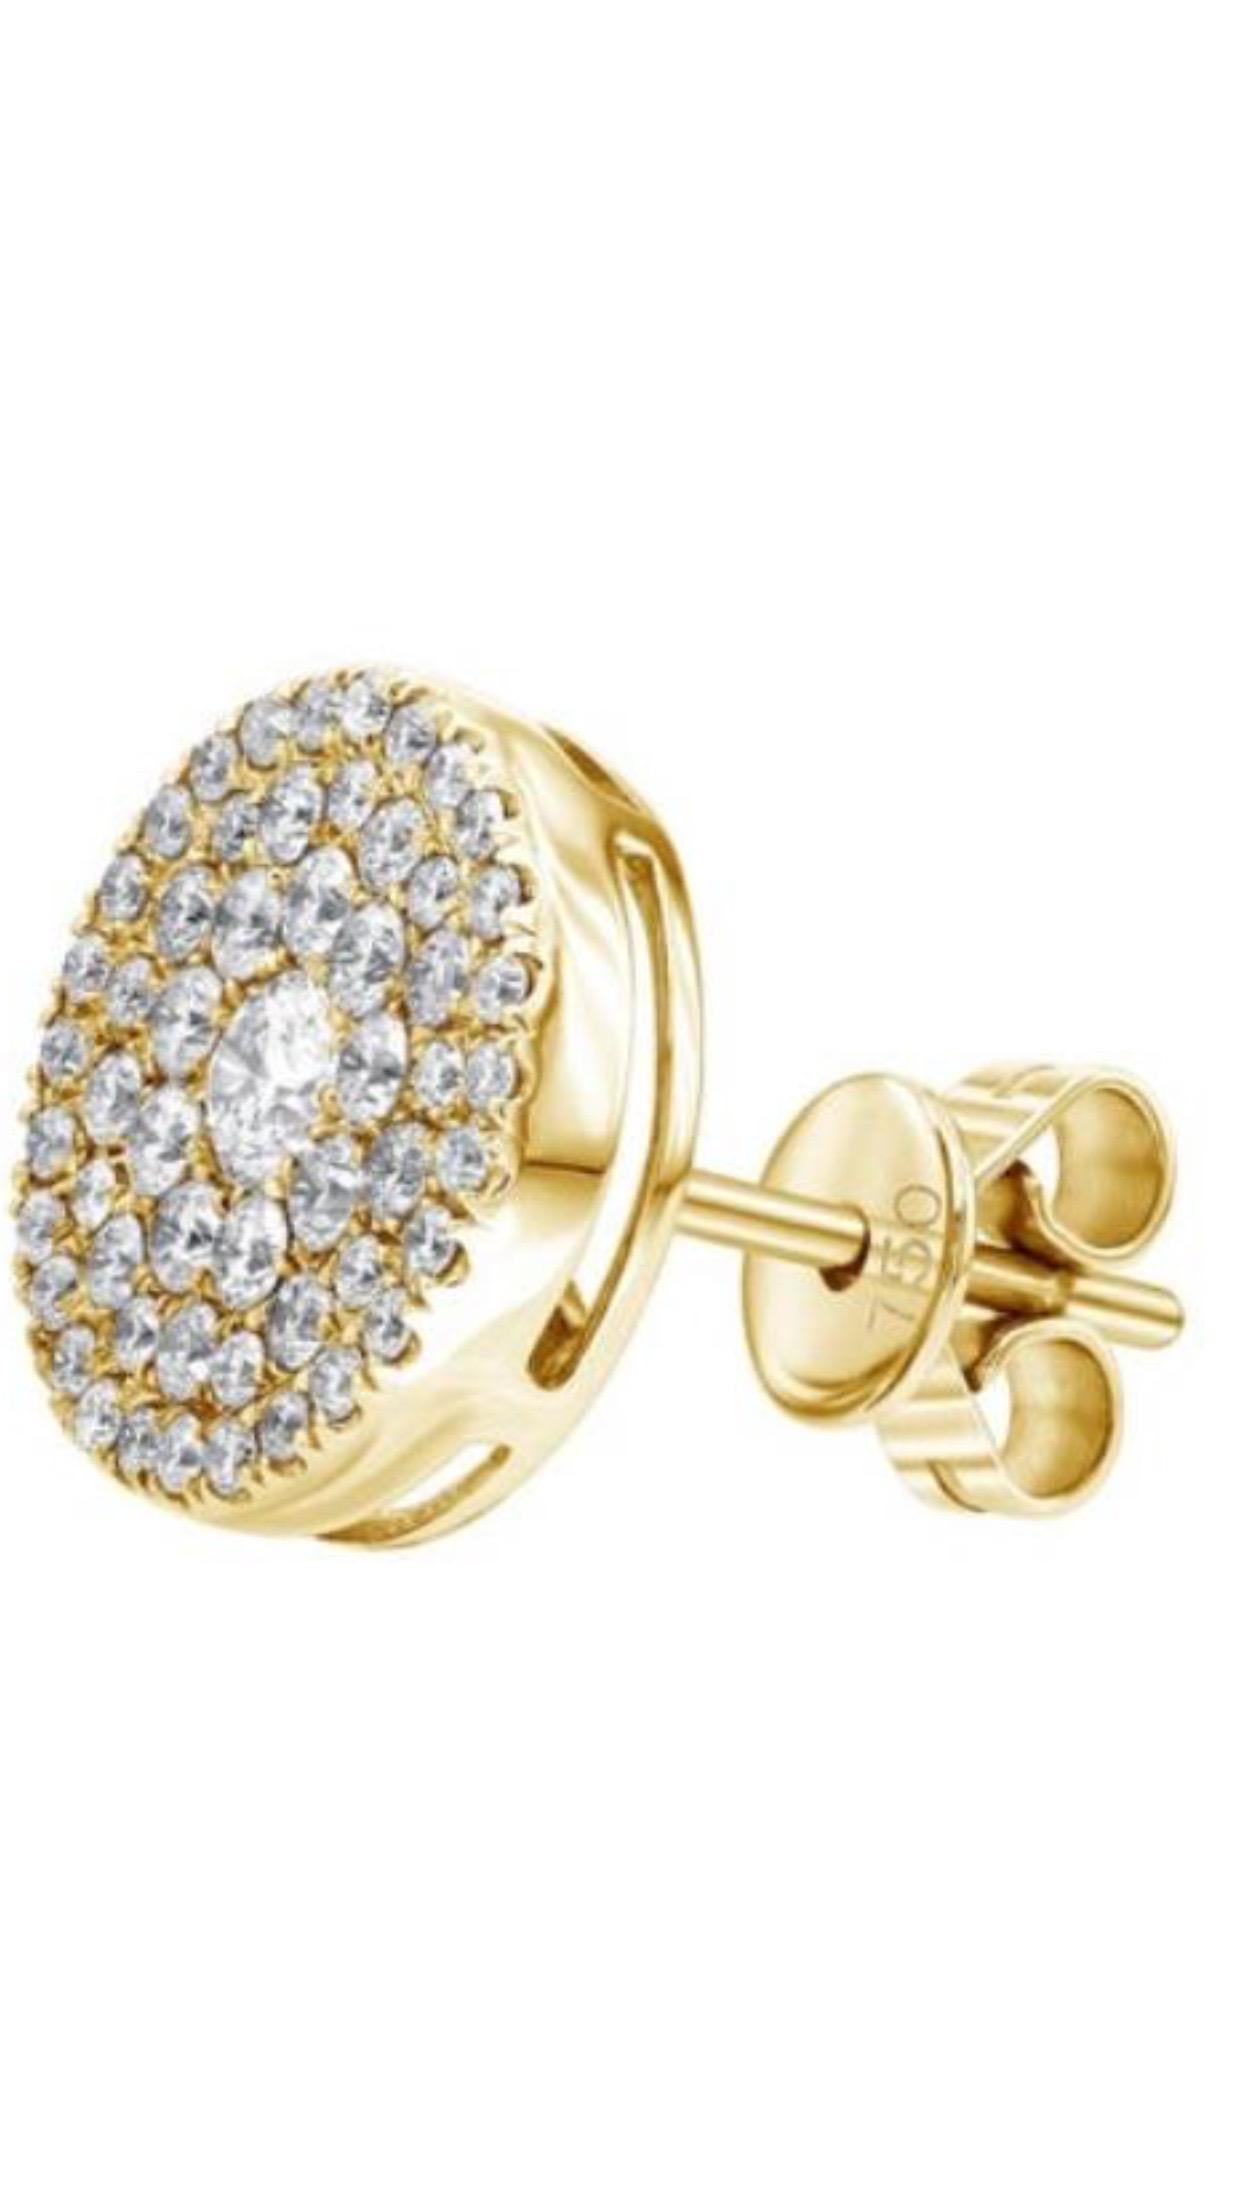 earrings with round white diamonds in 18 kt yellow gold